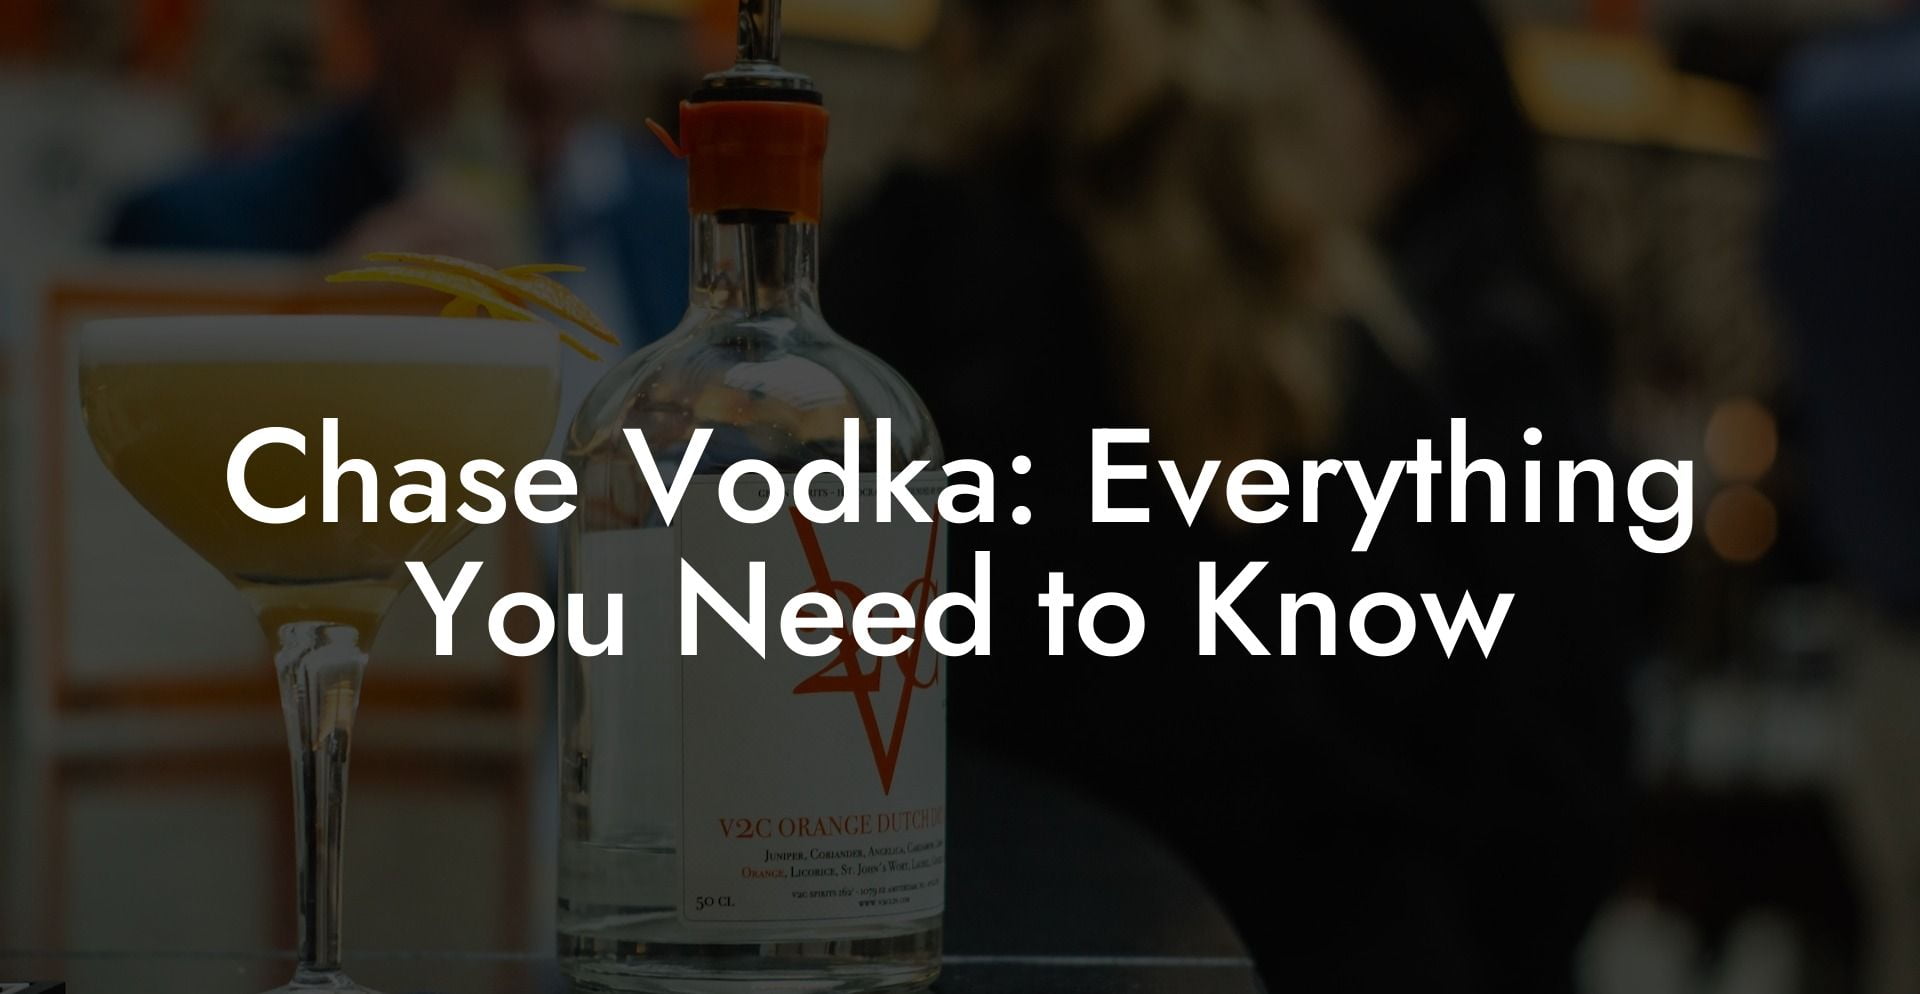 Chase Vodka: Everything You Need to Know